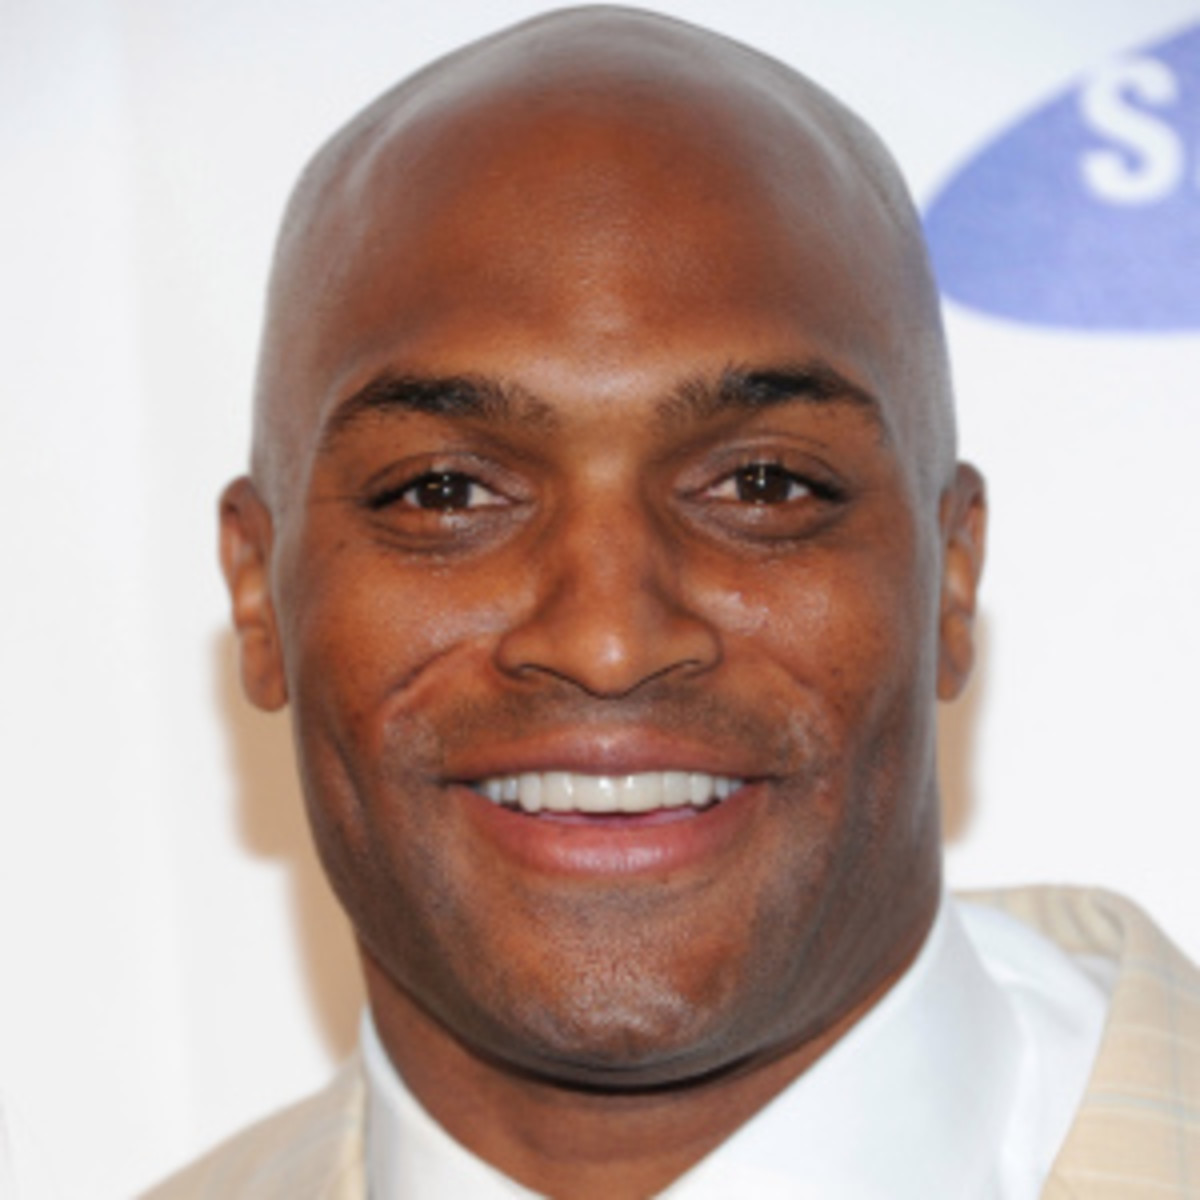 Amani Toomer slammed Ray Lewis for his on-field antics. (Jason Kempin/Getty Images)